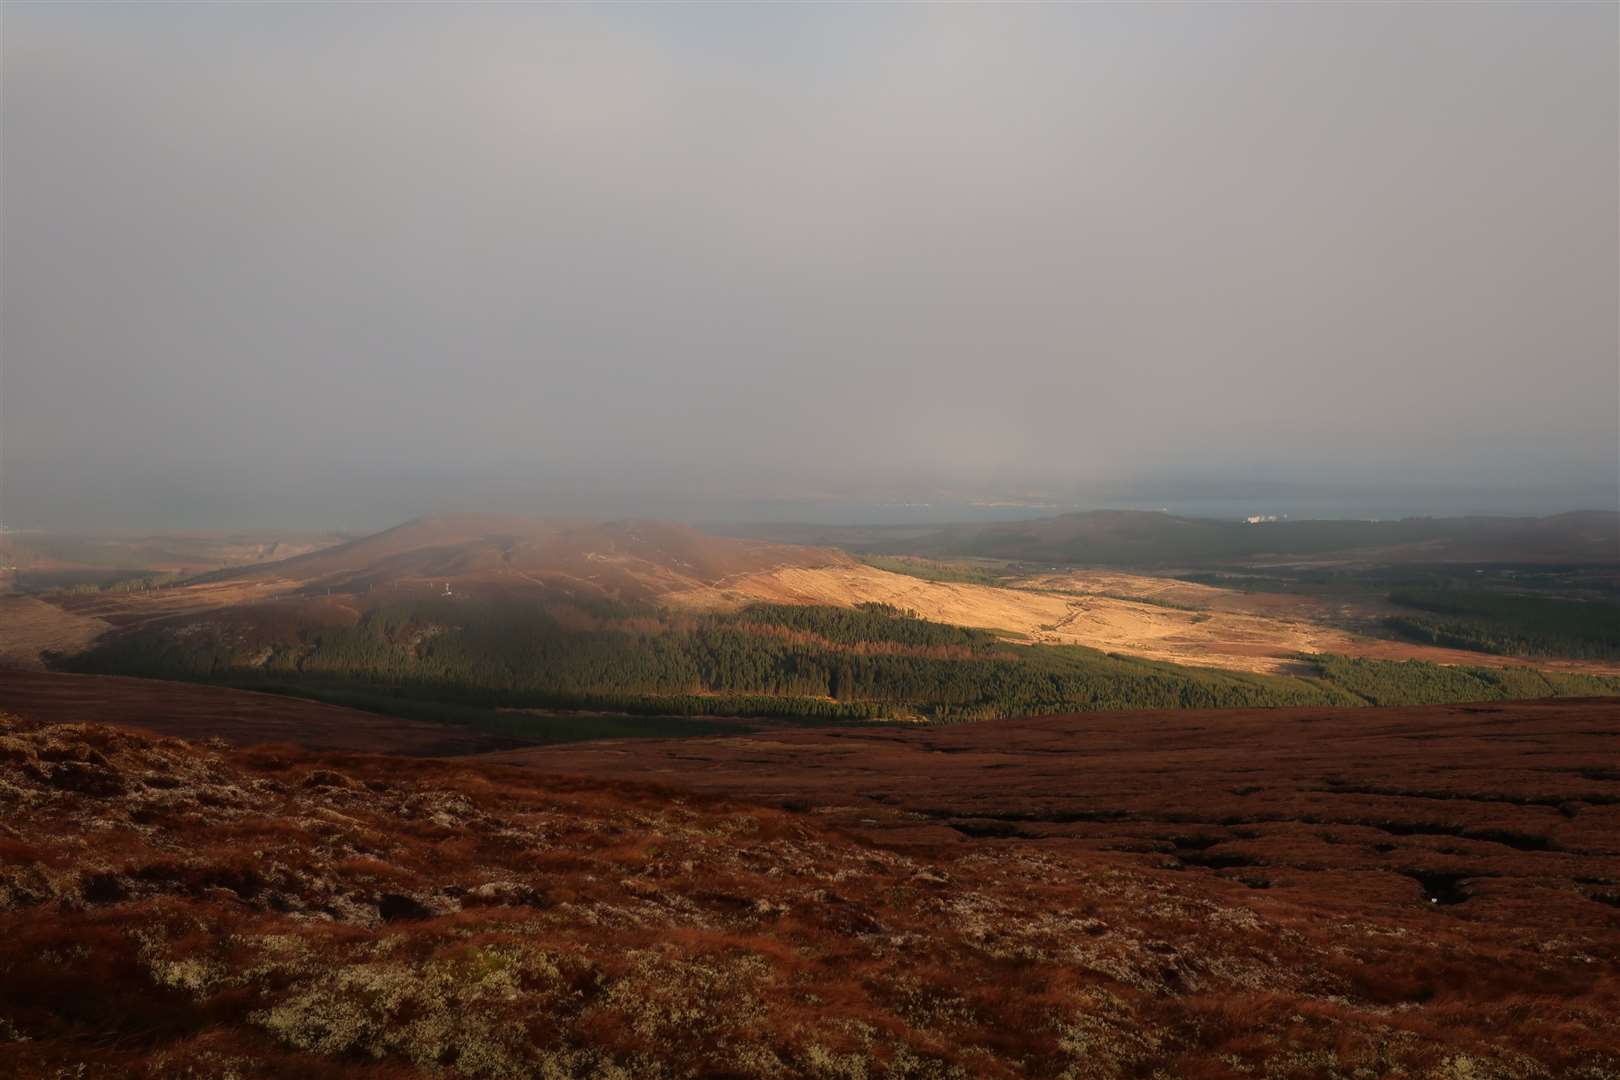 Looking north over Meall Mor to the Moray Firth.